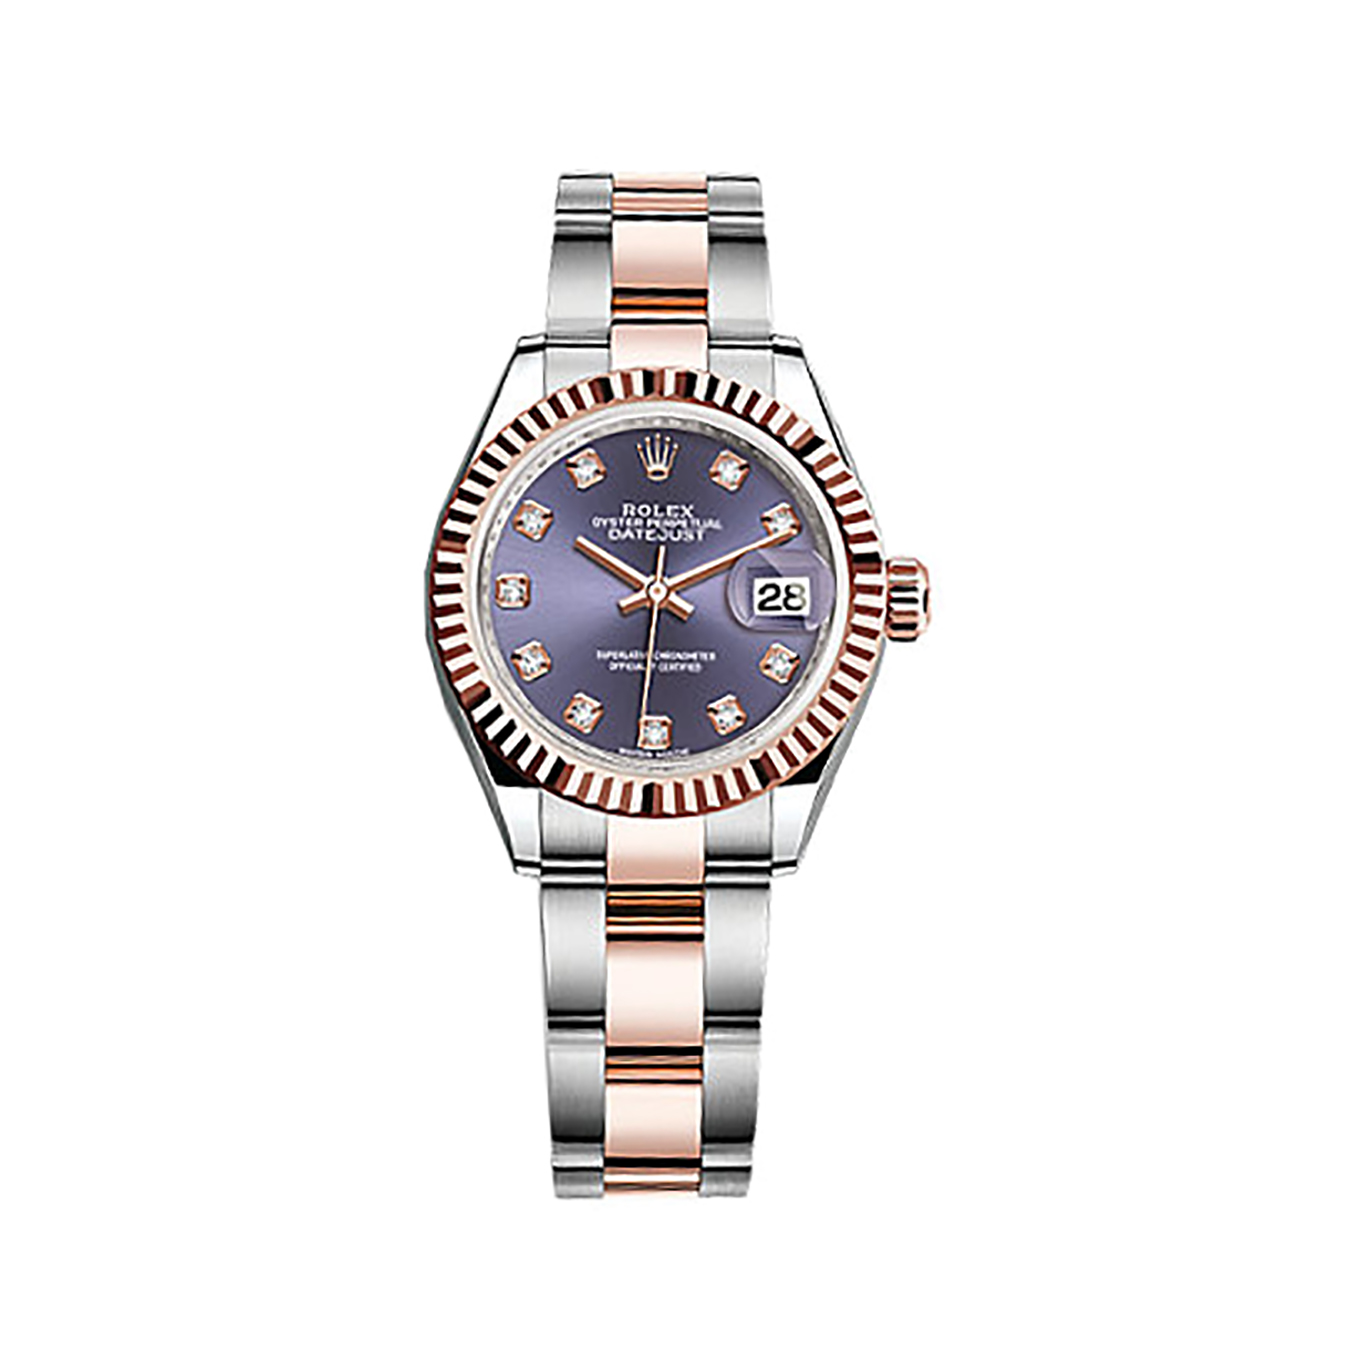 Lady-Datejust 28 279171 Rose Gold & Stainless Steel Watch (Aubergine Set with Diamonds)